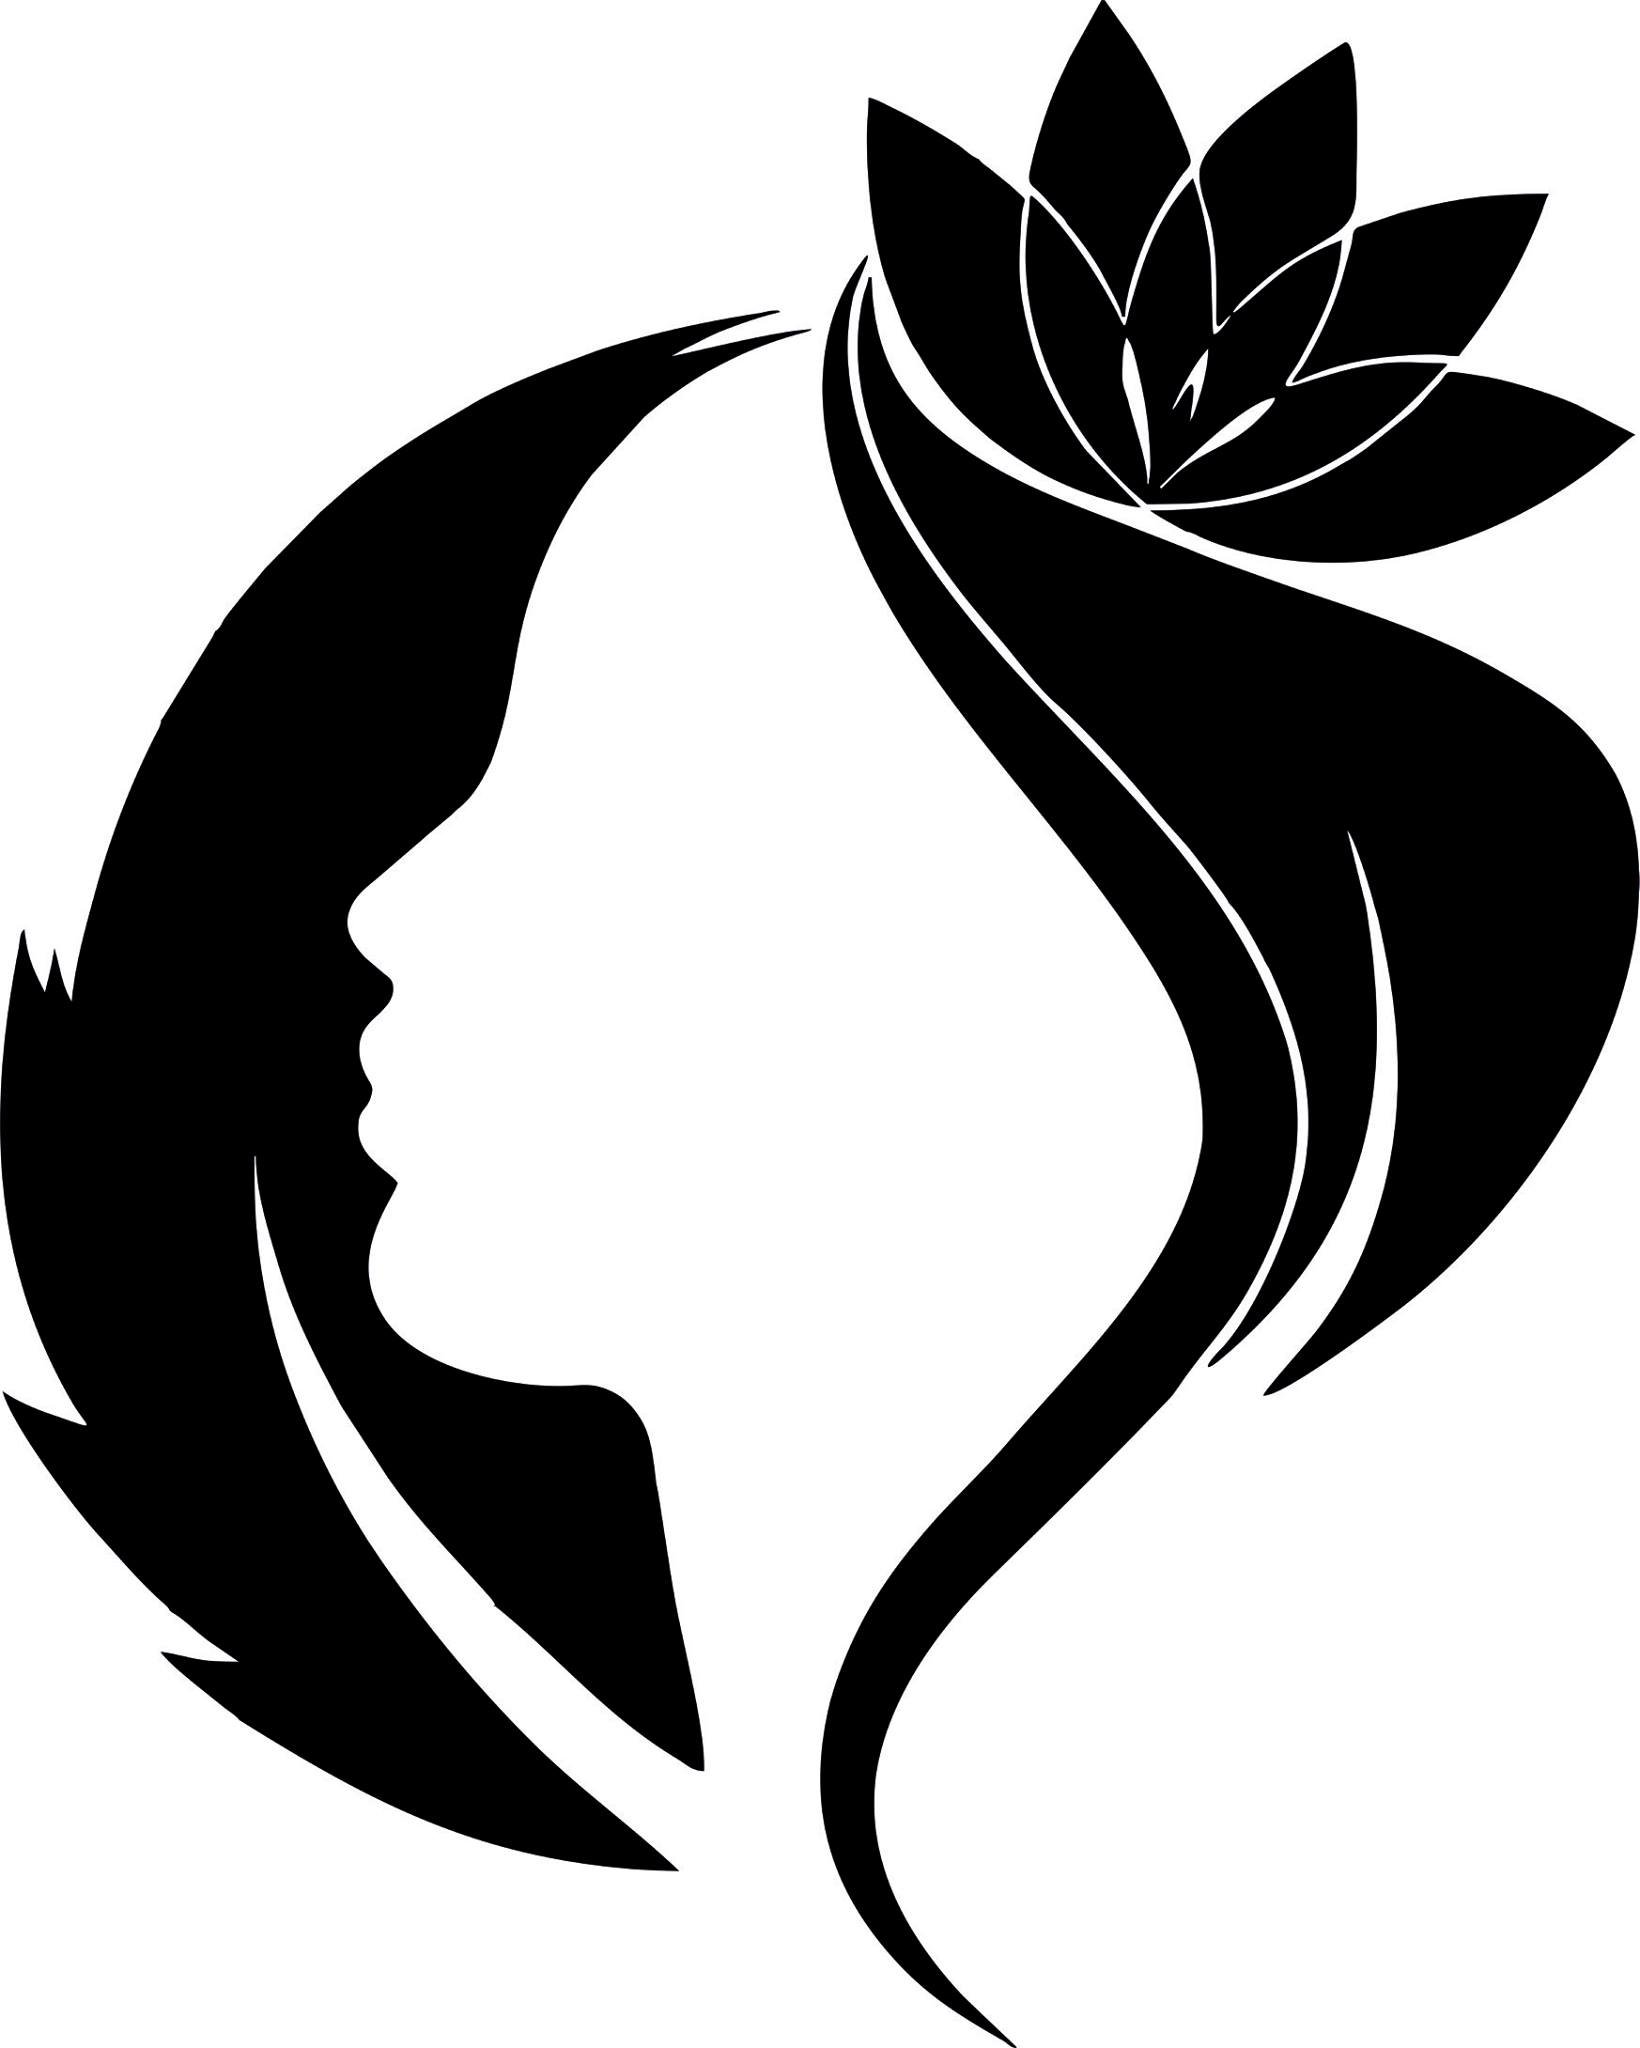 Spring Woman Vector Art jpg Image Free Download - 3axis.co